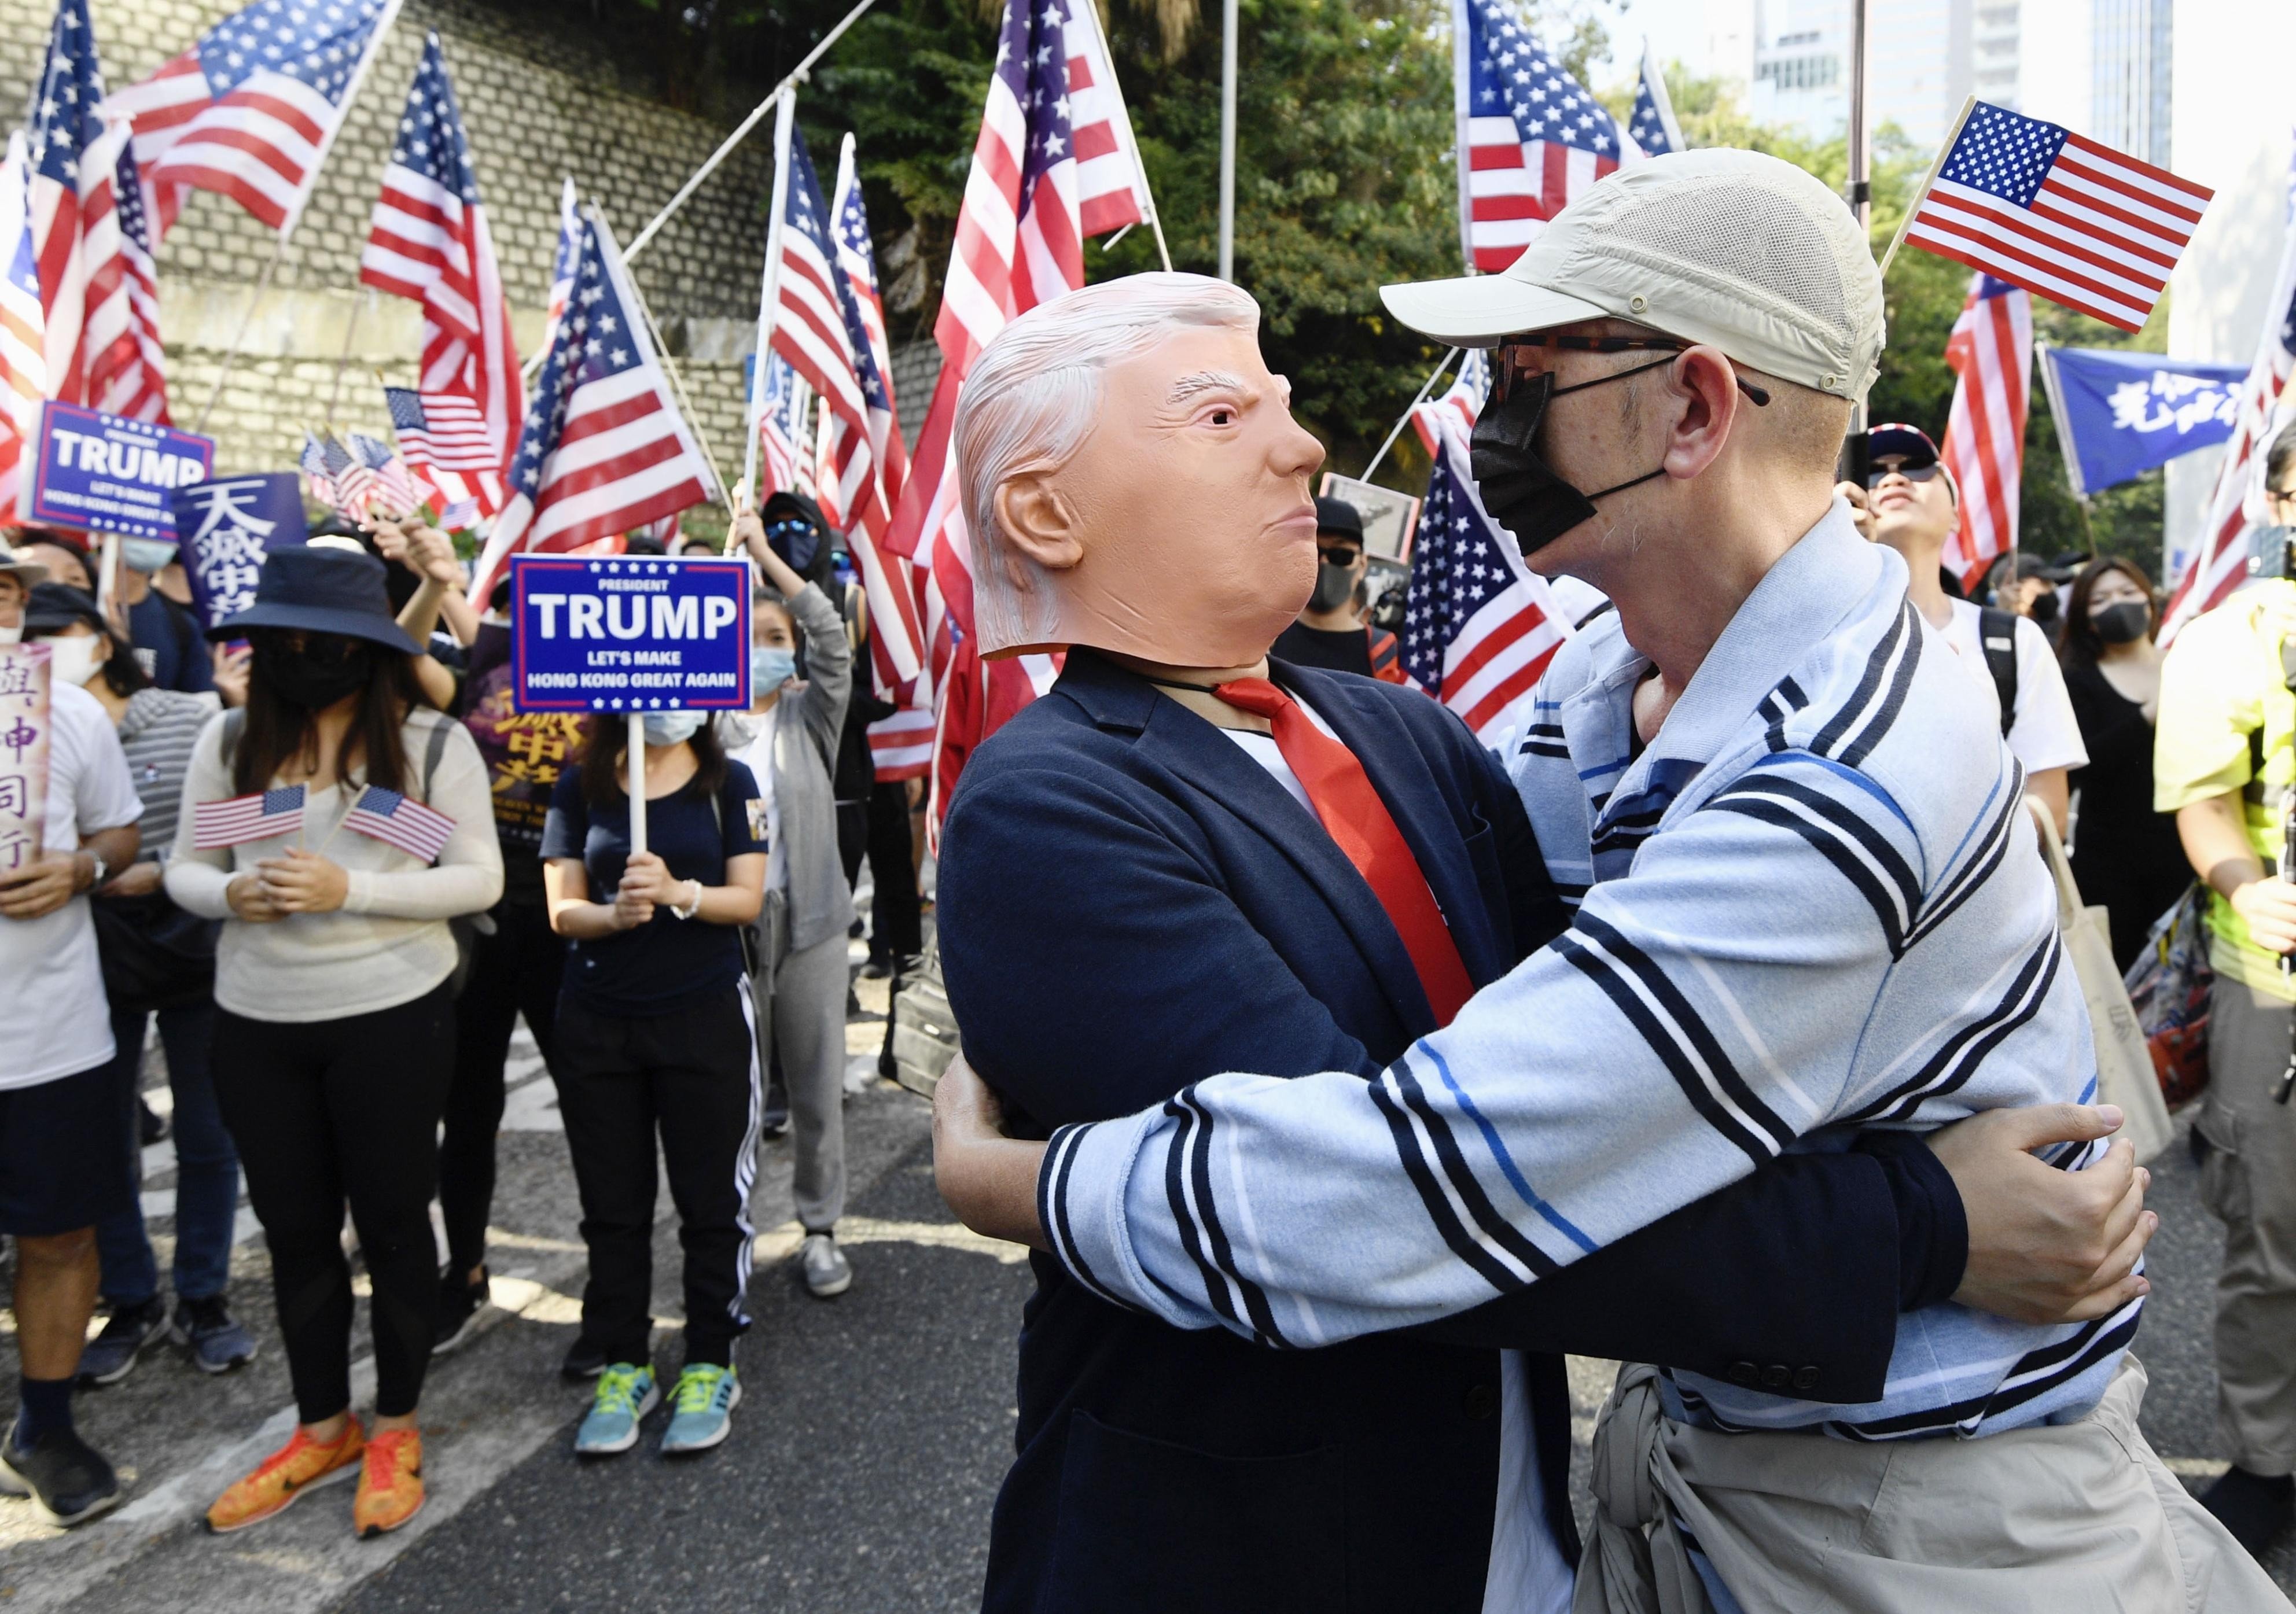 A masked protester embraces a man wearing a Donald Trump mask at a pro-US rally on December 1 in Hong Kong, after US President Donald Trump signed the Hong Kong Human Rights and Democracy Act. Photo: Kyodo